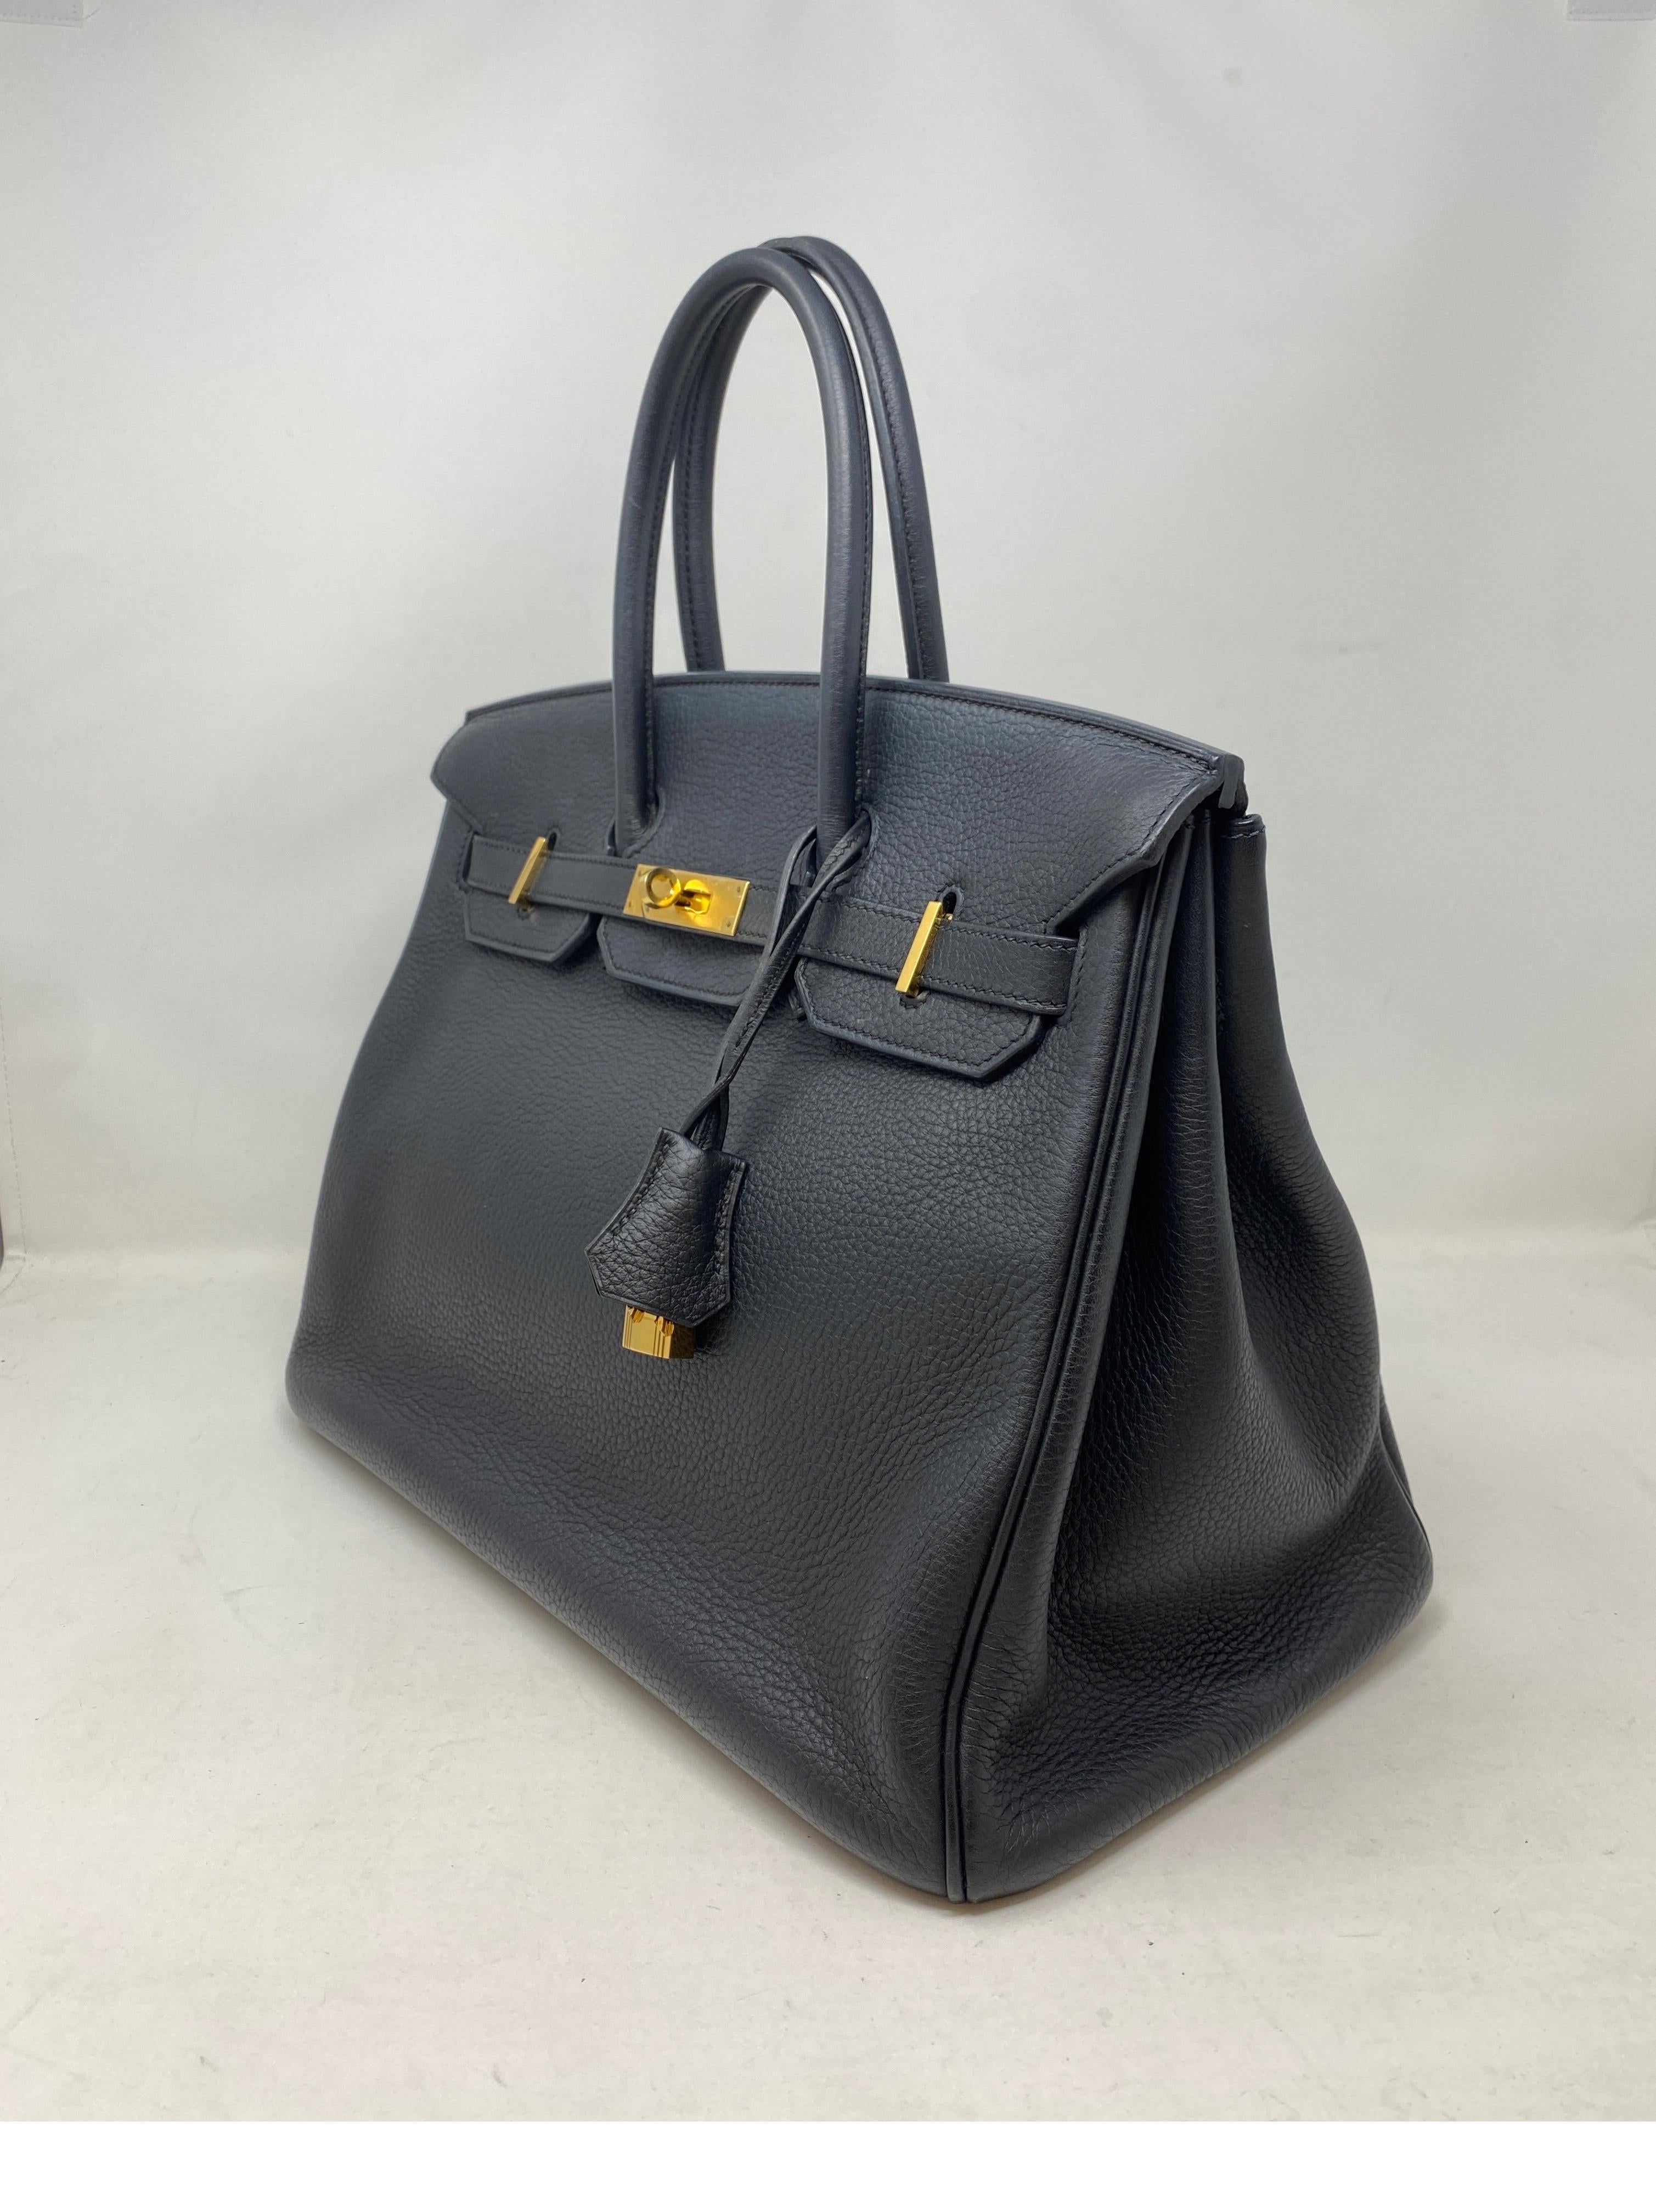 Hermes Black Birkin 35 Bag. Gold hardware. The most wanted combination. Beautiful bag in excellent condition. Includes clochette, lock, keys, and dust cover. Best investment bag. Guaranteed authentic. 